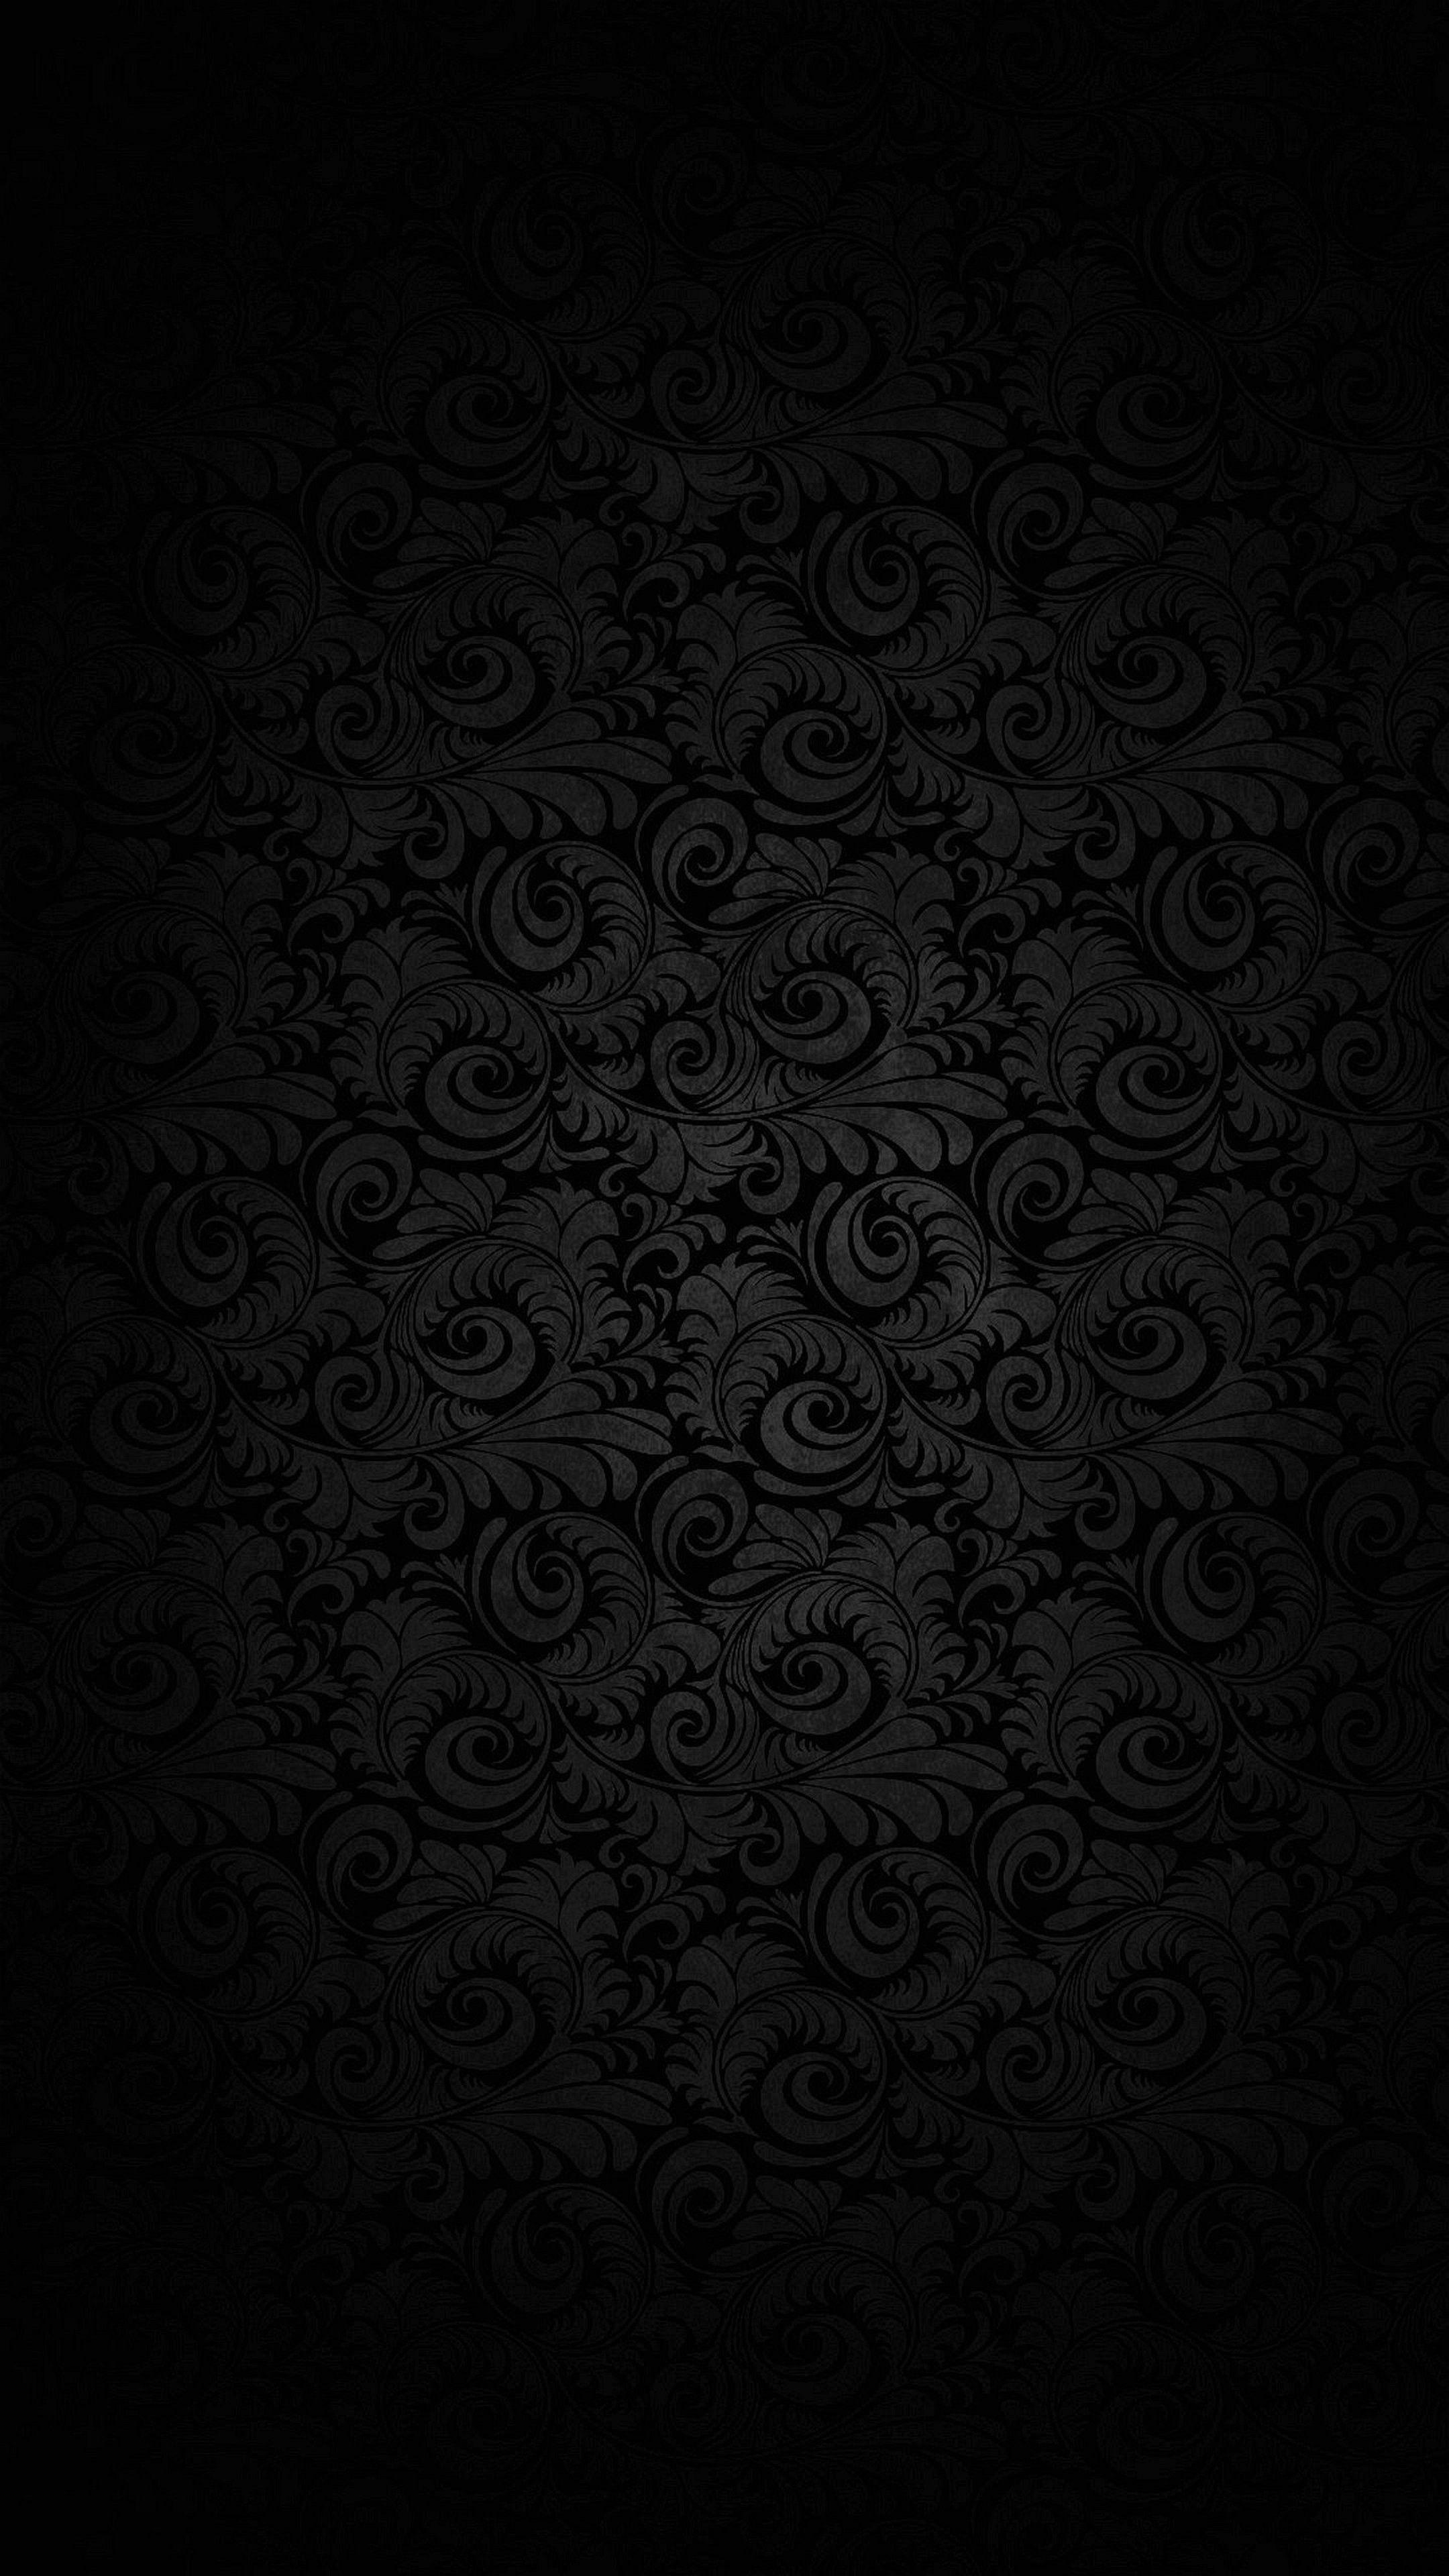 Black qhd samsung galaxy s6 s7 edge note lg g4 wallpapers hd desktop  backgrounds 1440x2560 images and pictures